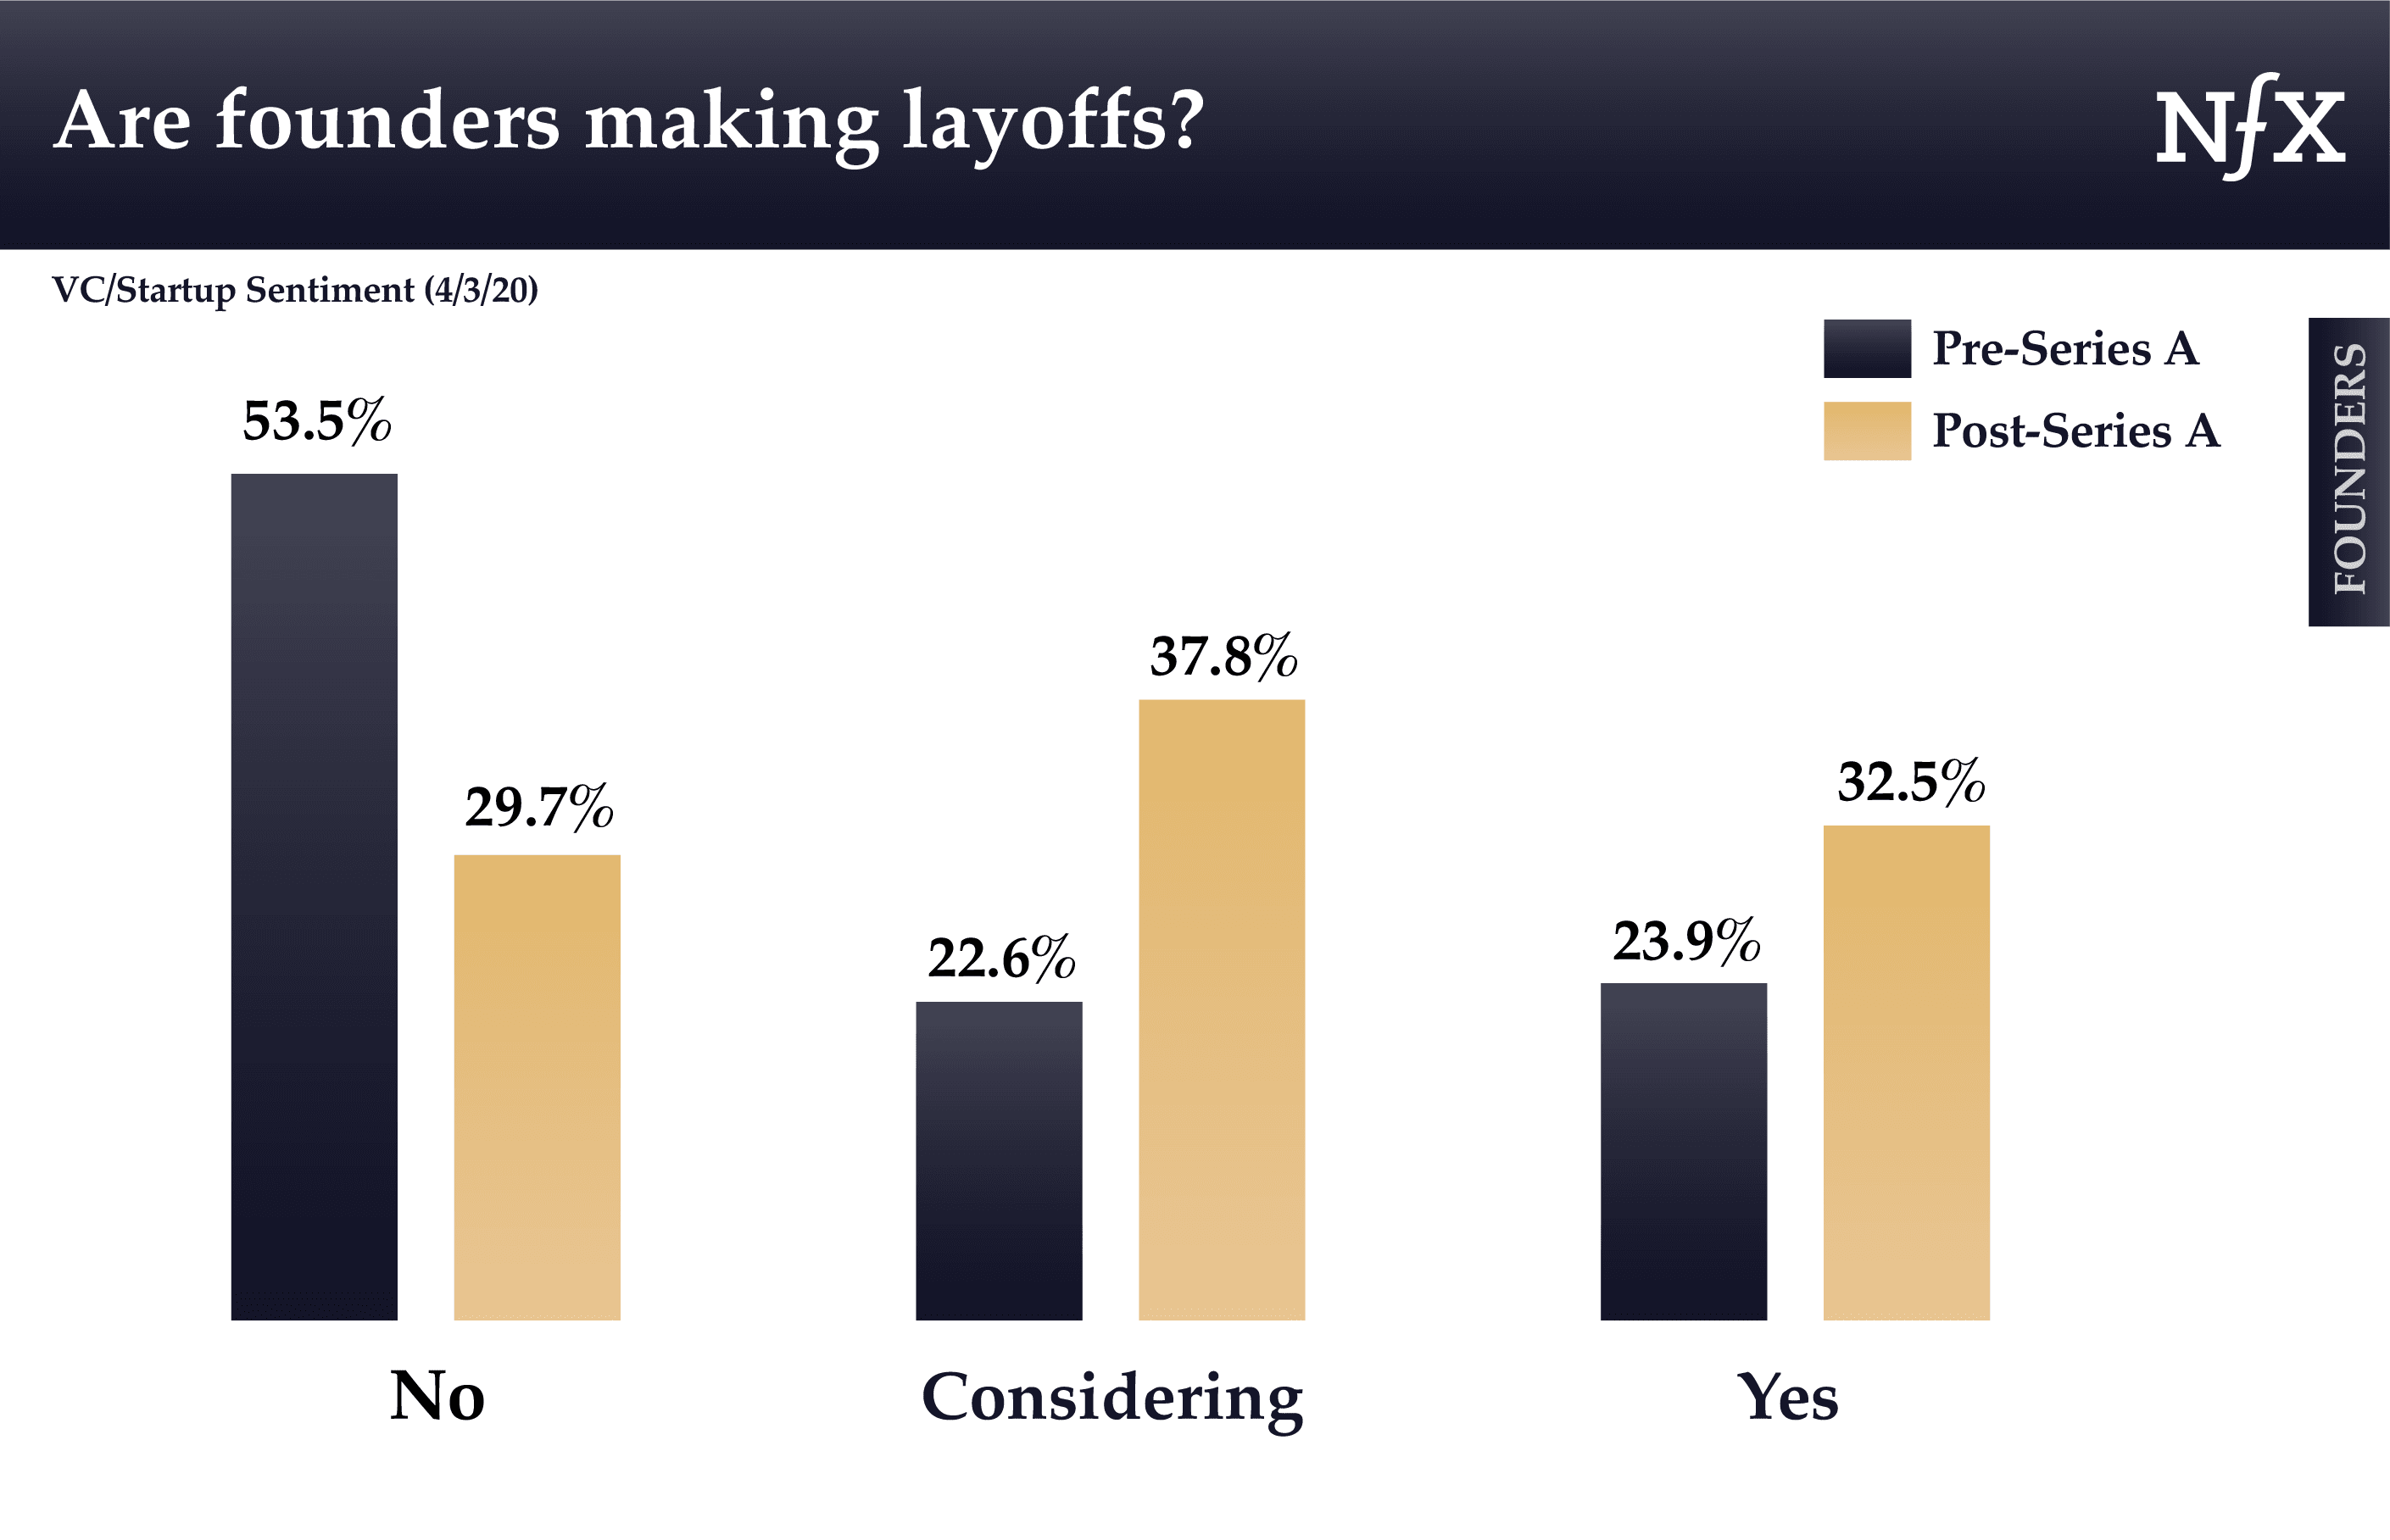 Are founders making layoffs during COVID-19?